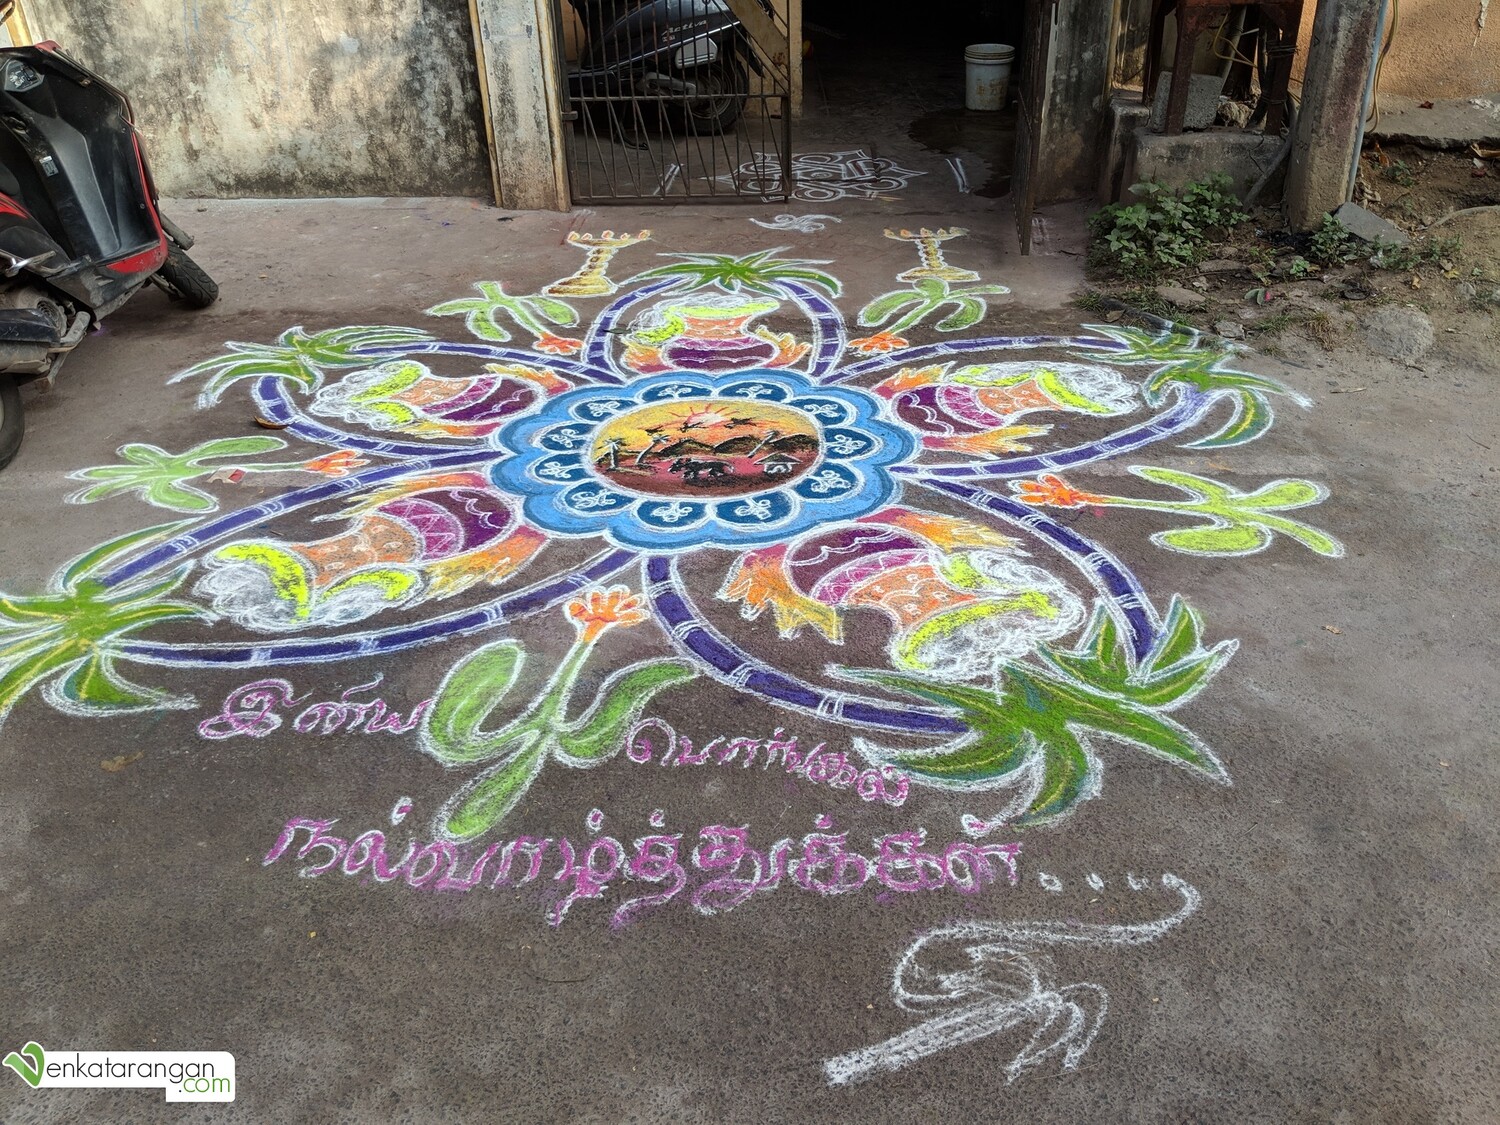 A sunrise scene from a village drawn as a Kolam, also seen are sugarcanes and rice pots